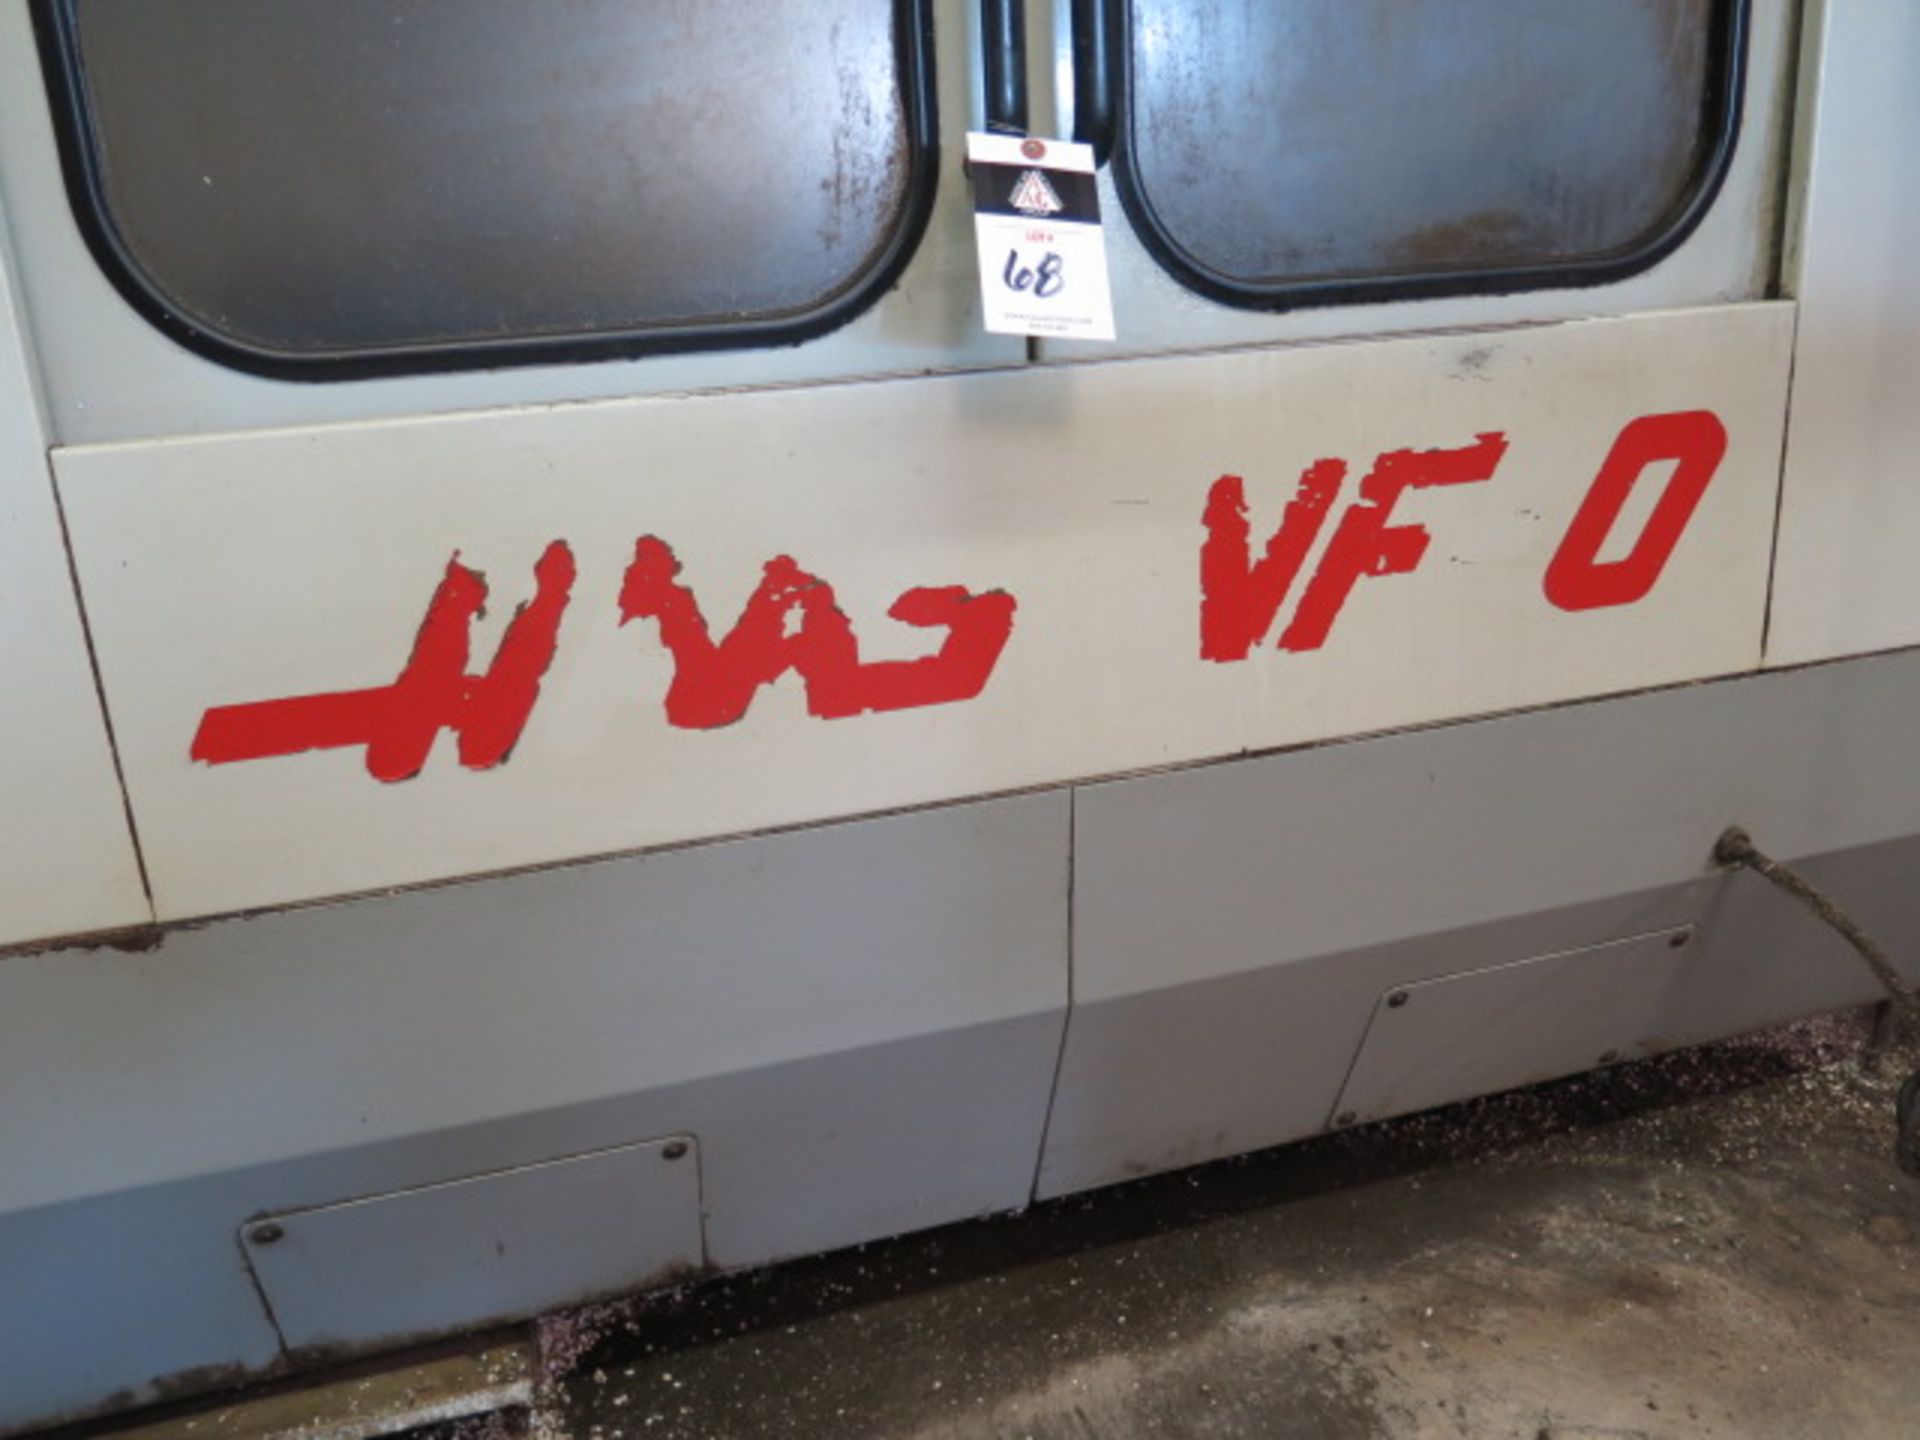 1995 Haas VF-0 CNC VMC s/n 4162 w/ Haas Controls, 20-Station ATC, CAT-40 Taper, SOLD AS IS - Image 4 of 17